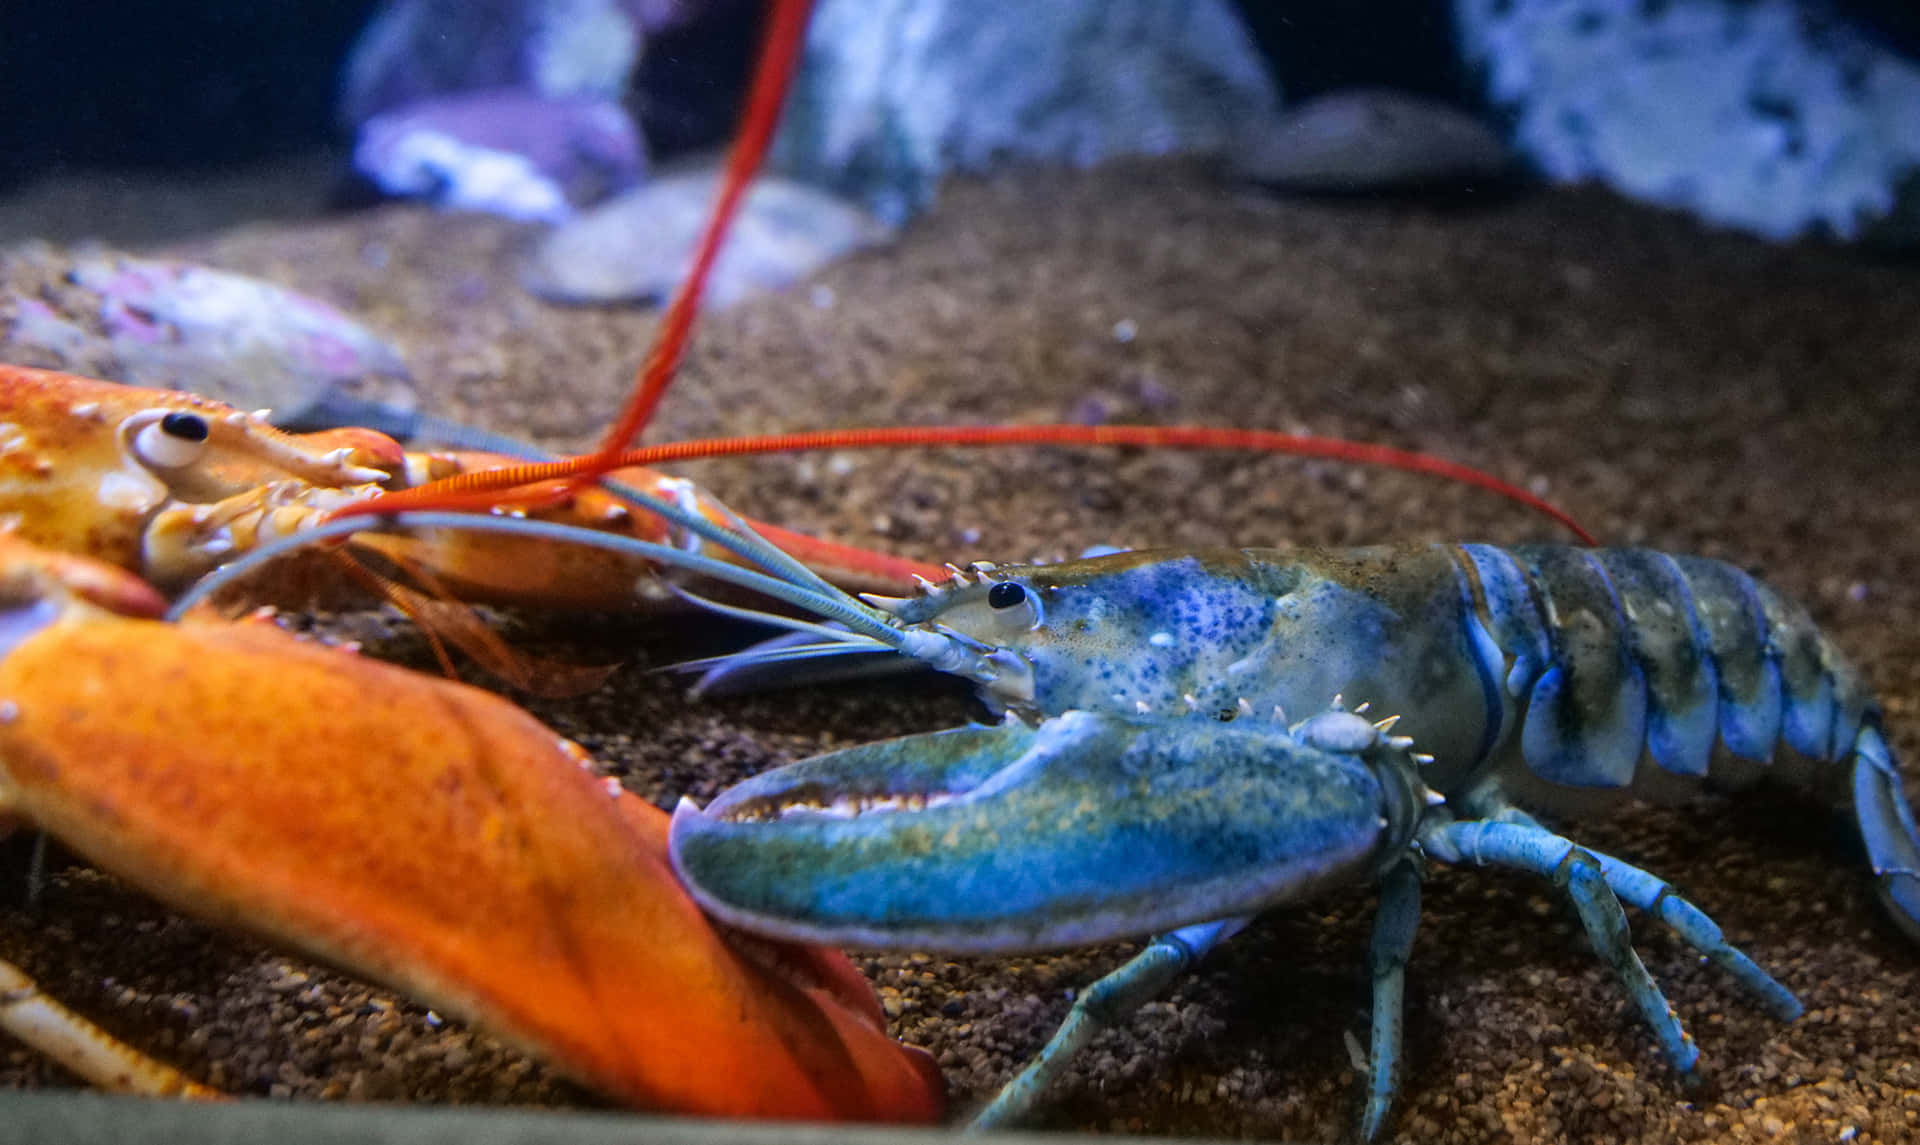 Get your claws on some delicious lobster